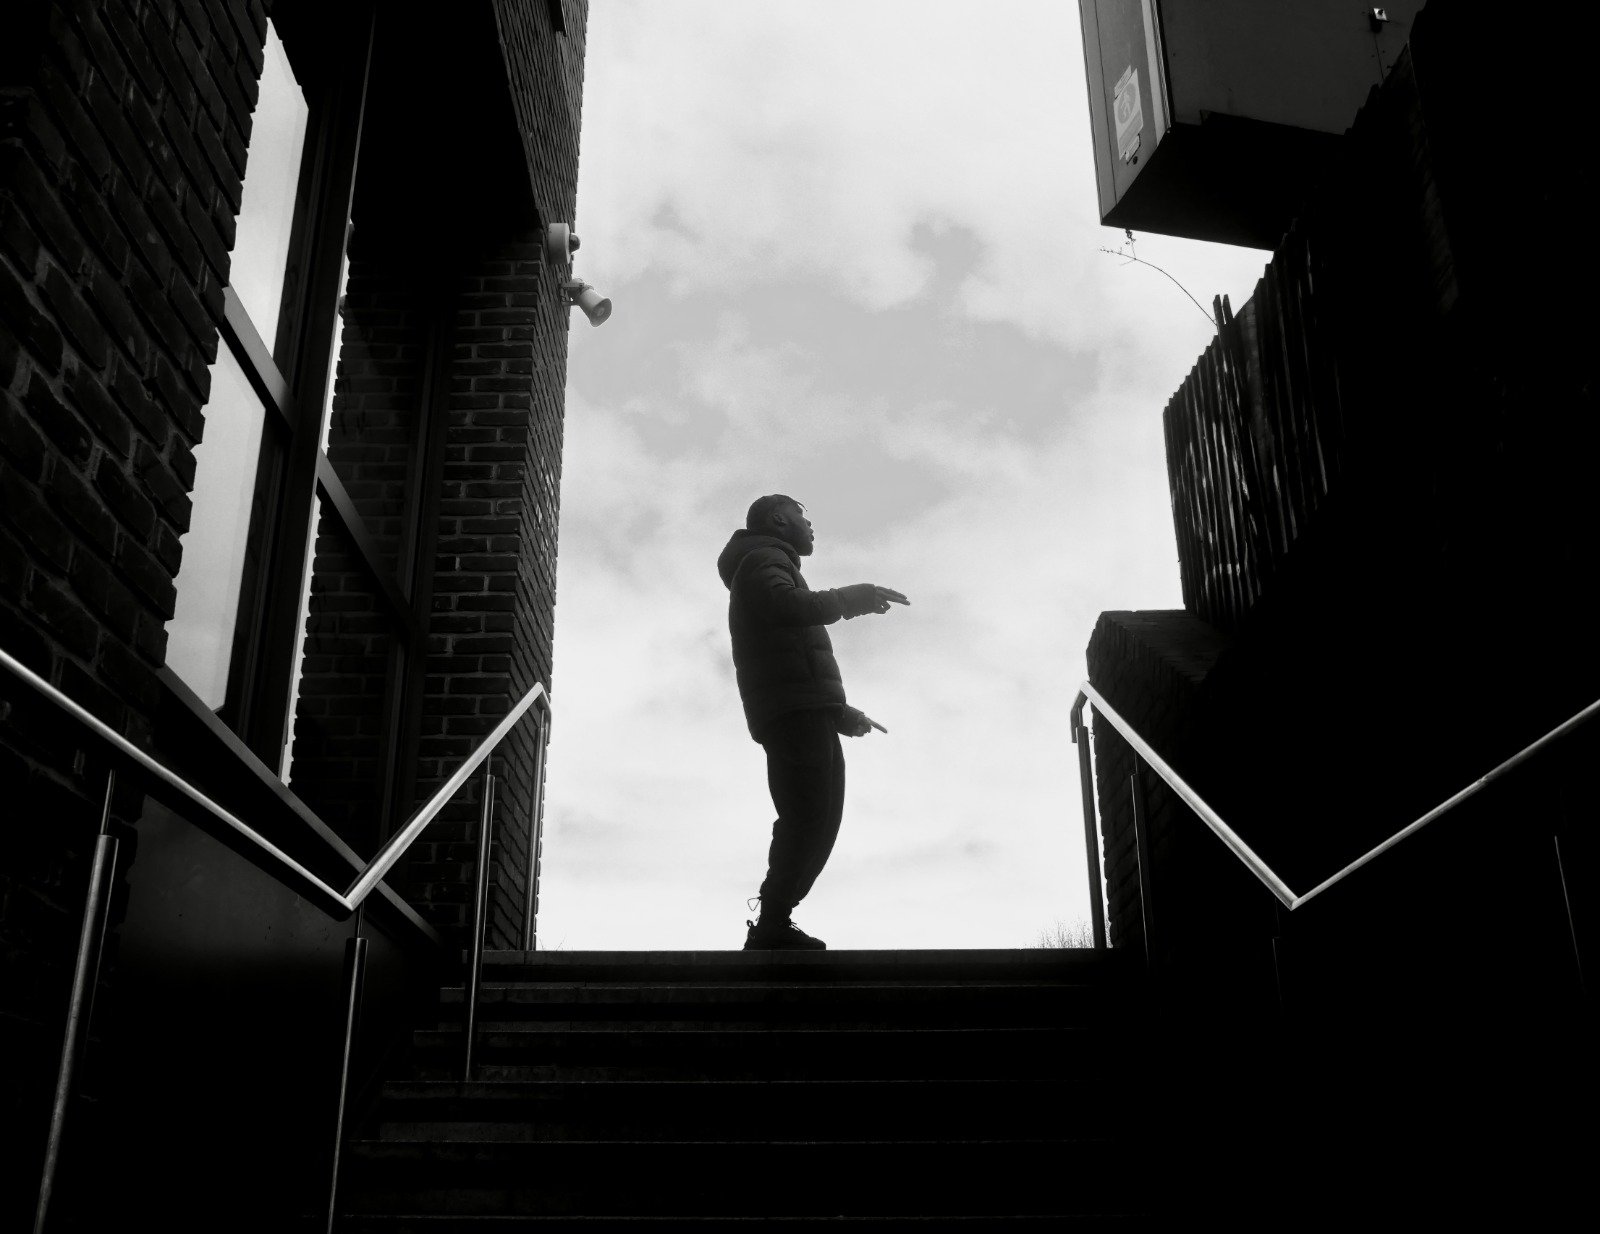 A Black man talking expressively at the top of the stairs in a new estate, black and white filter